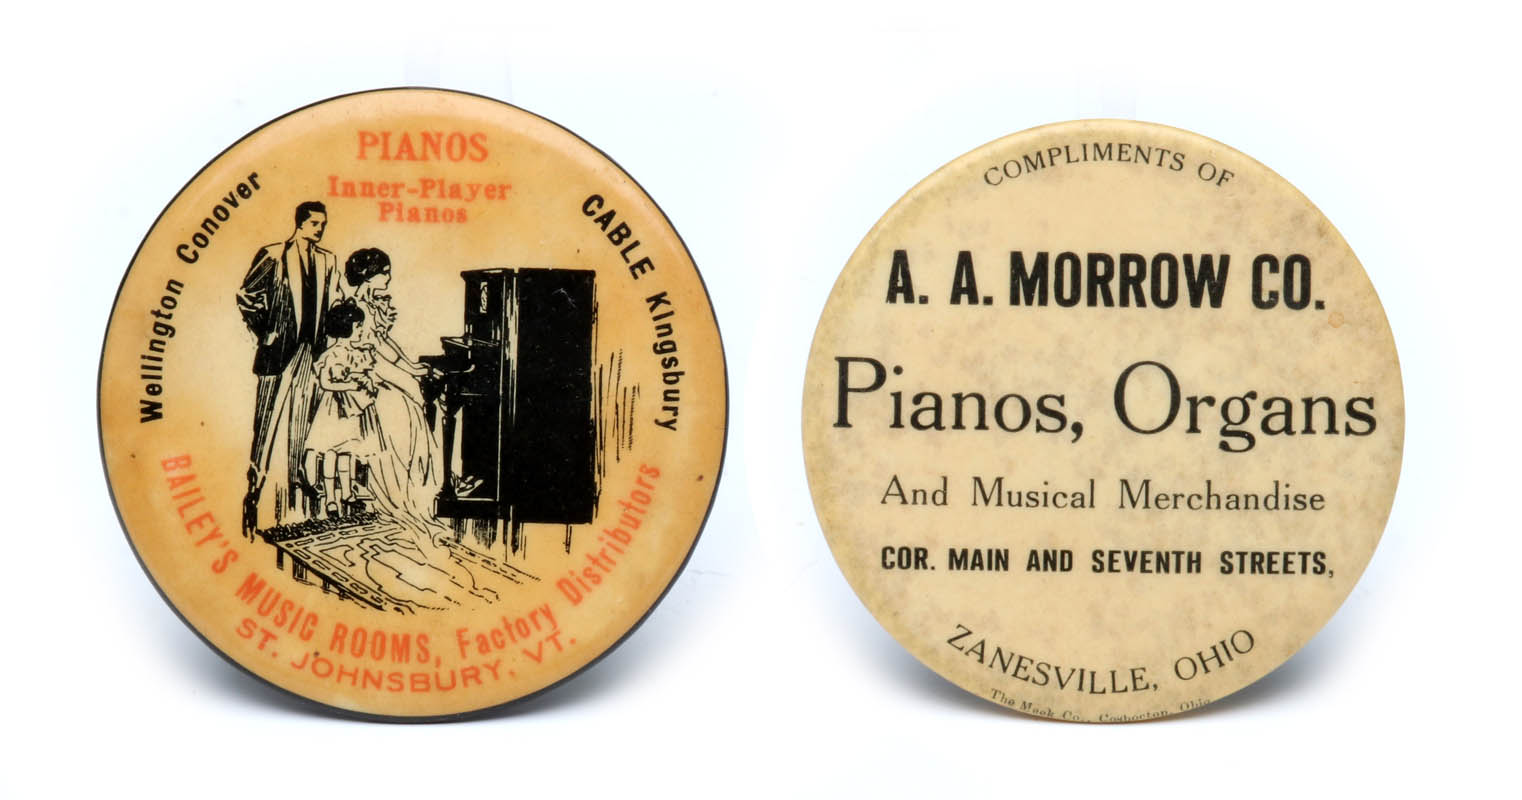 PIANO AND ORGAN CELLULOID ADVERTISING MIRRORS